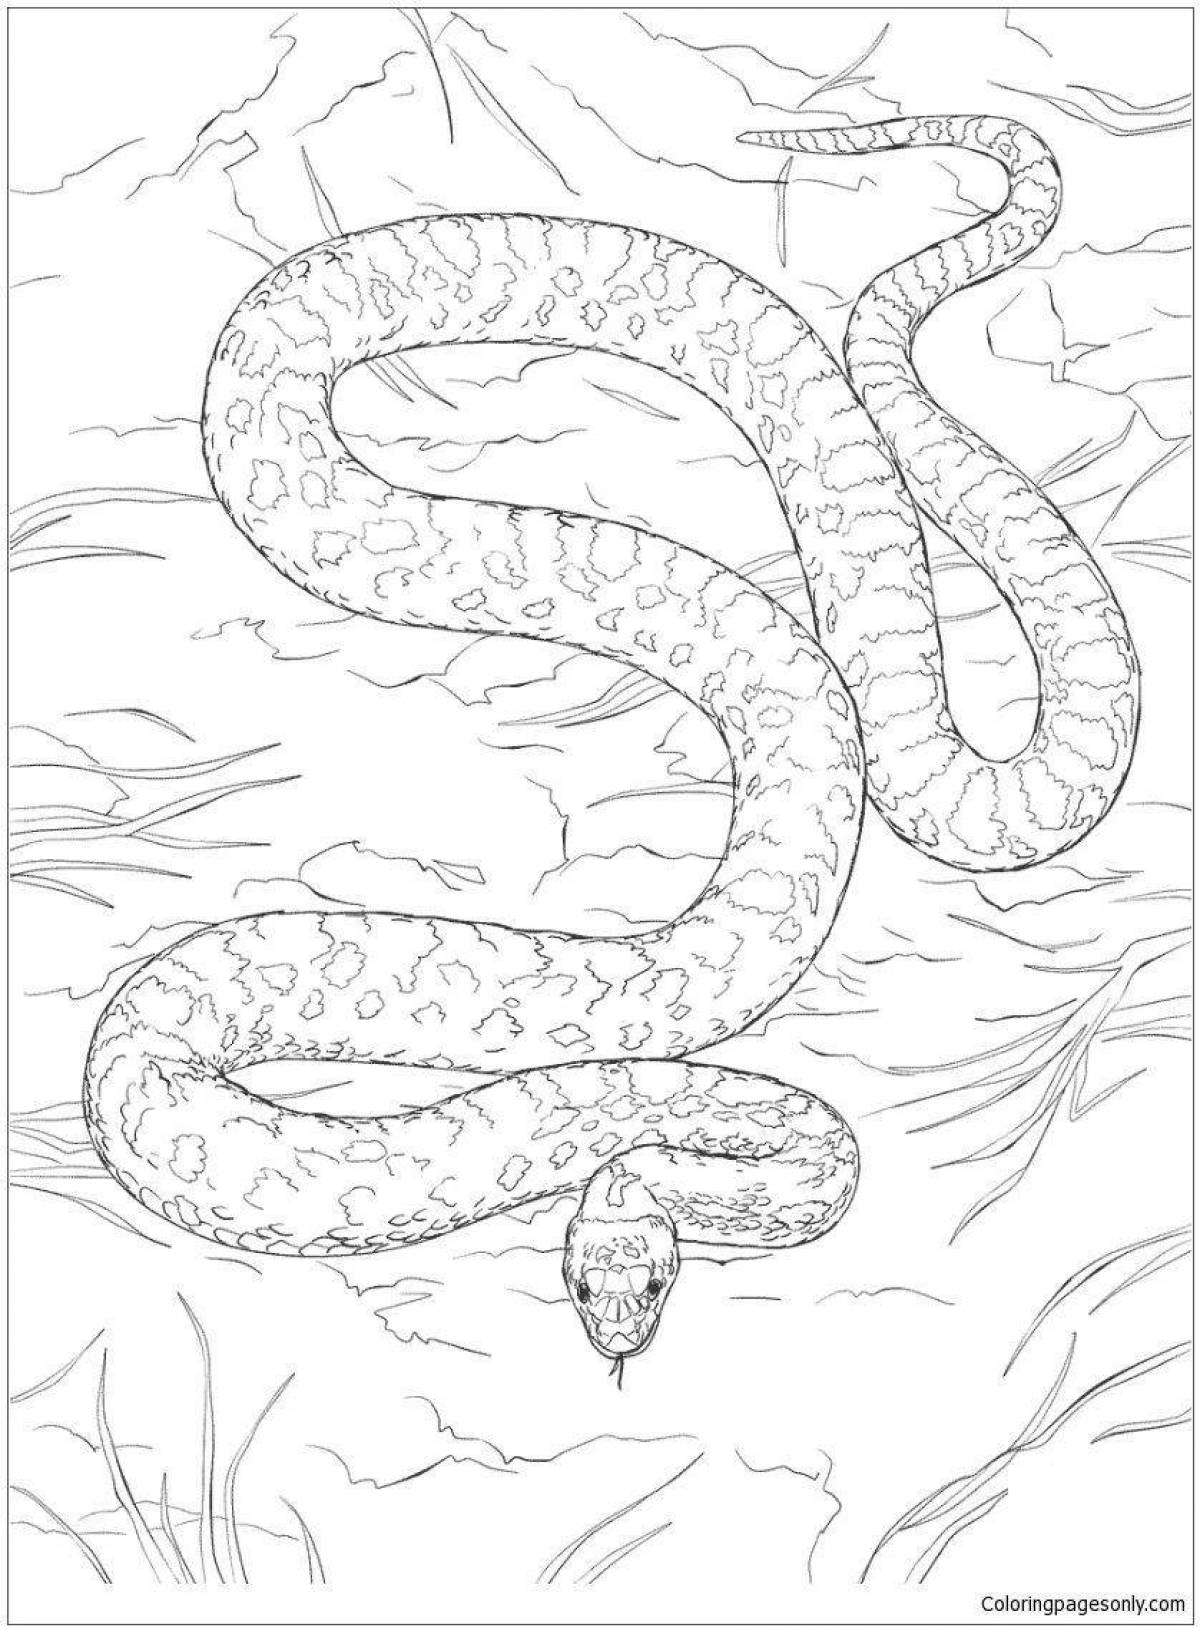 Coloring page dazzling steppe viper